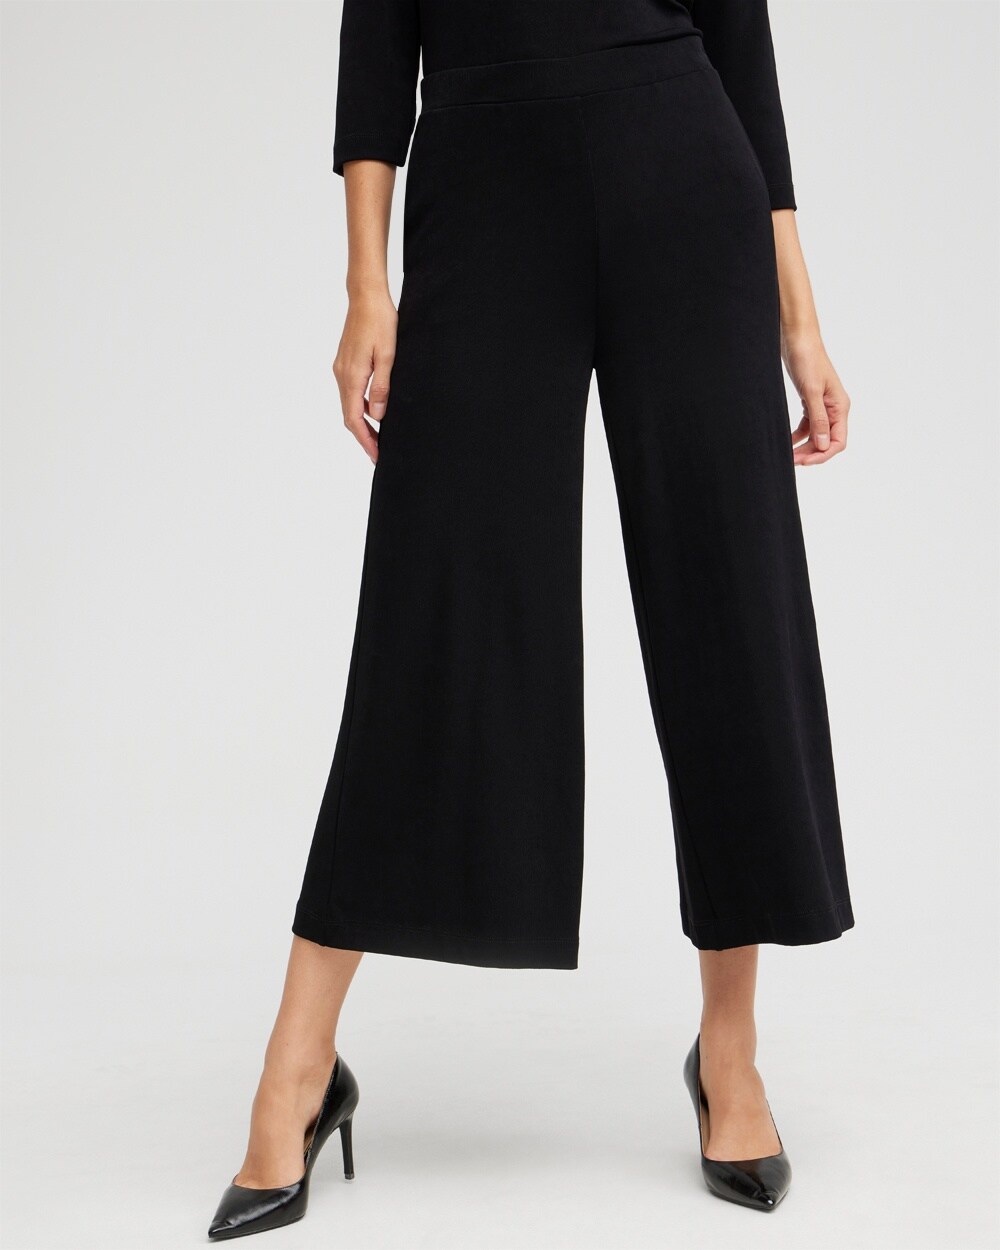 Shop Chico's Wrinkle-free Travelers Culotte Pants In Black Size 4p/6p Petite |  Travel Clothing